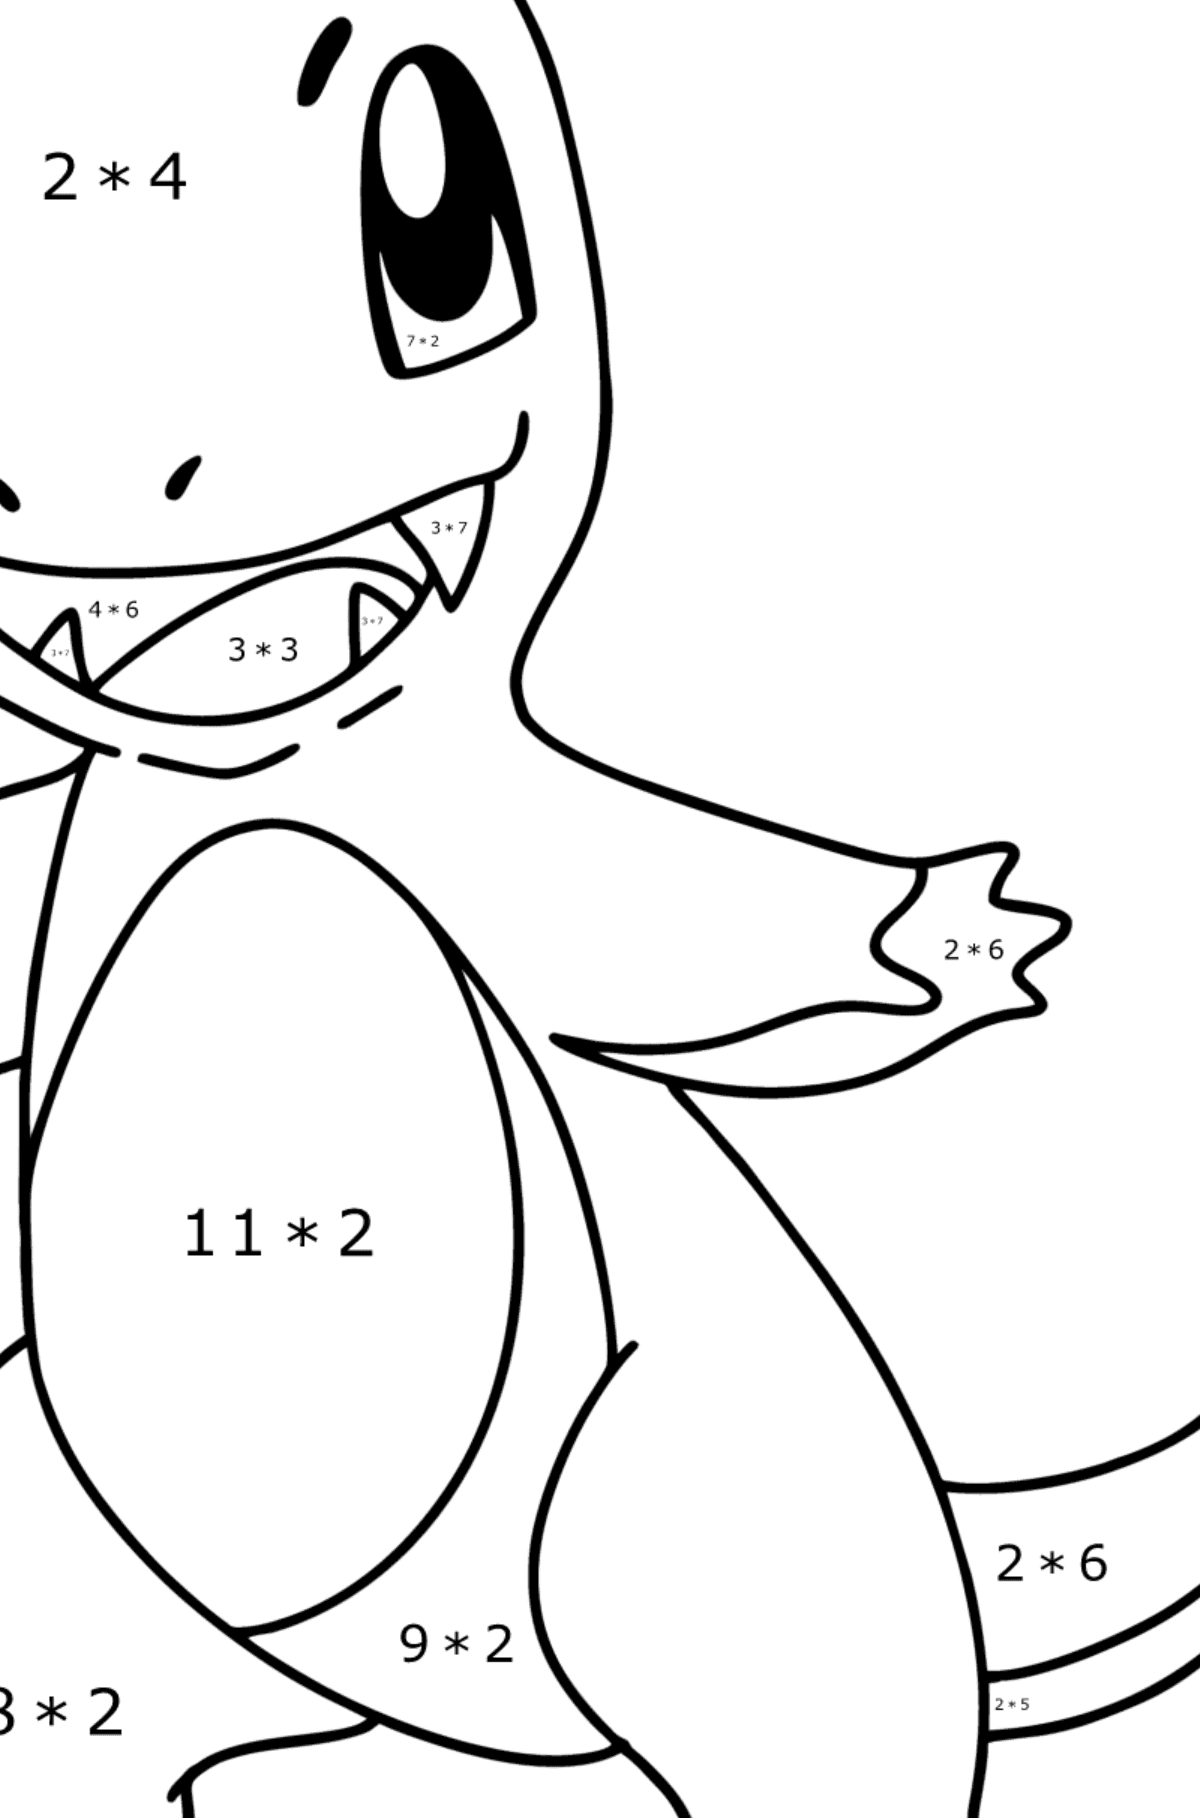 Pokémon Go Charmander coloring page - Math Coloring - Multiplication for Kids